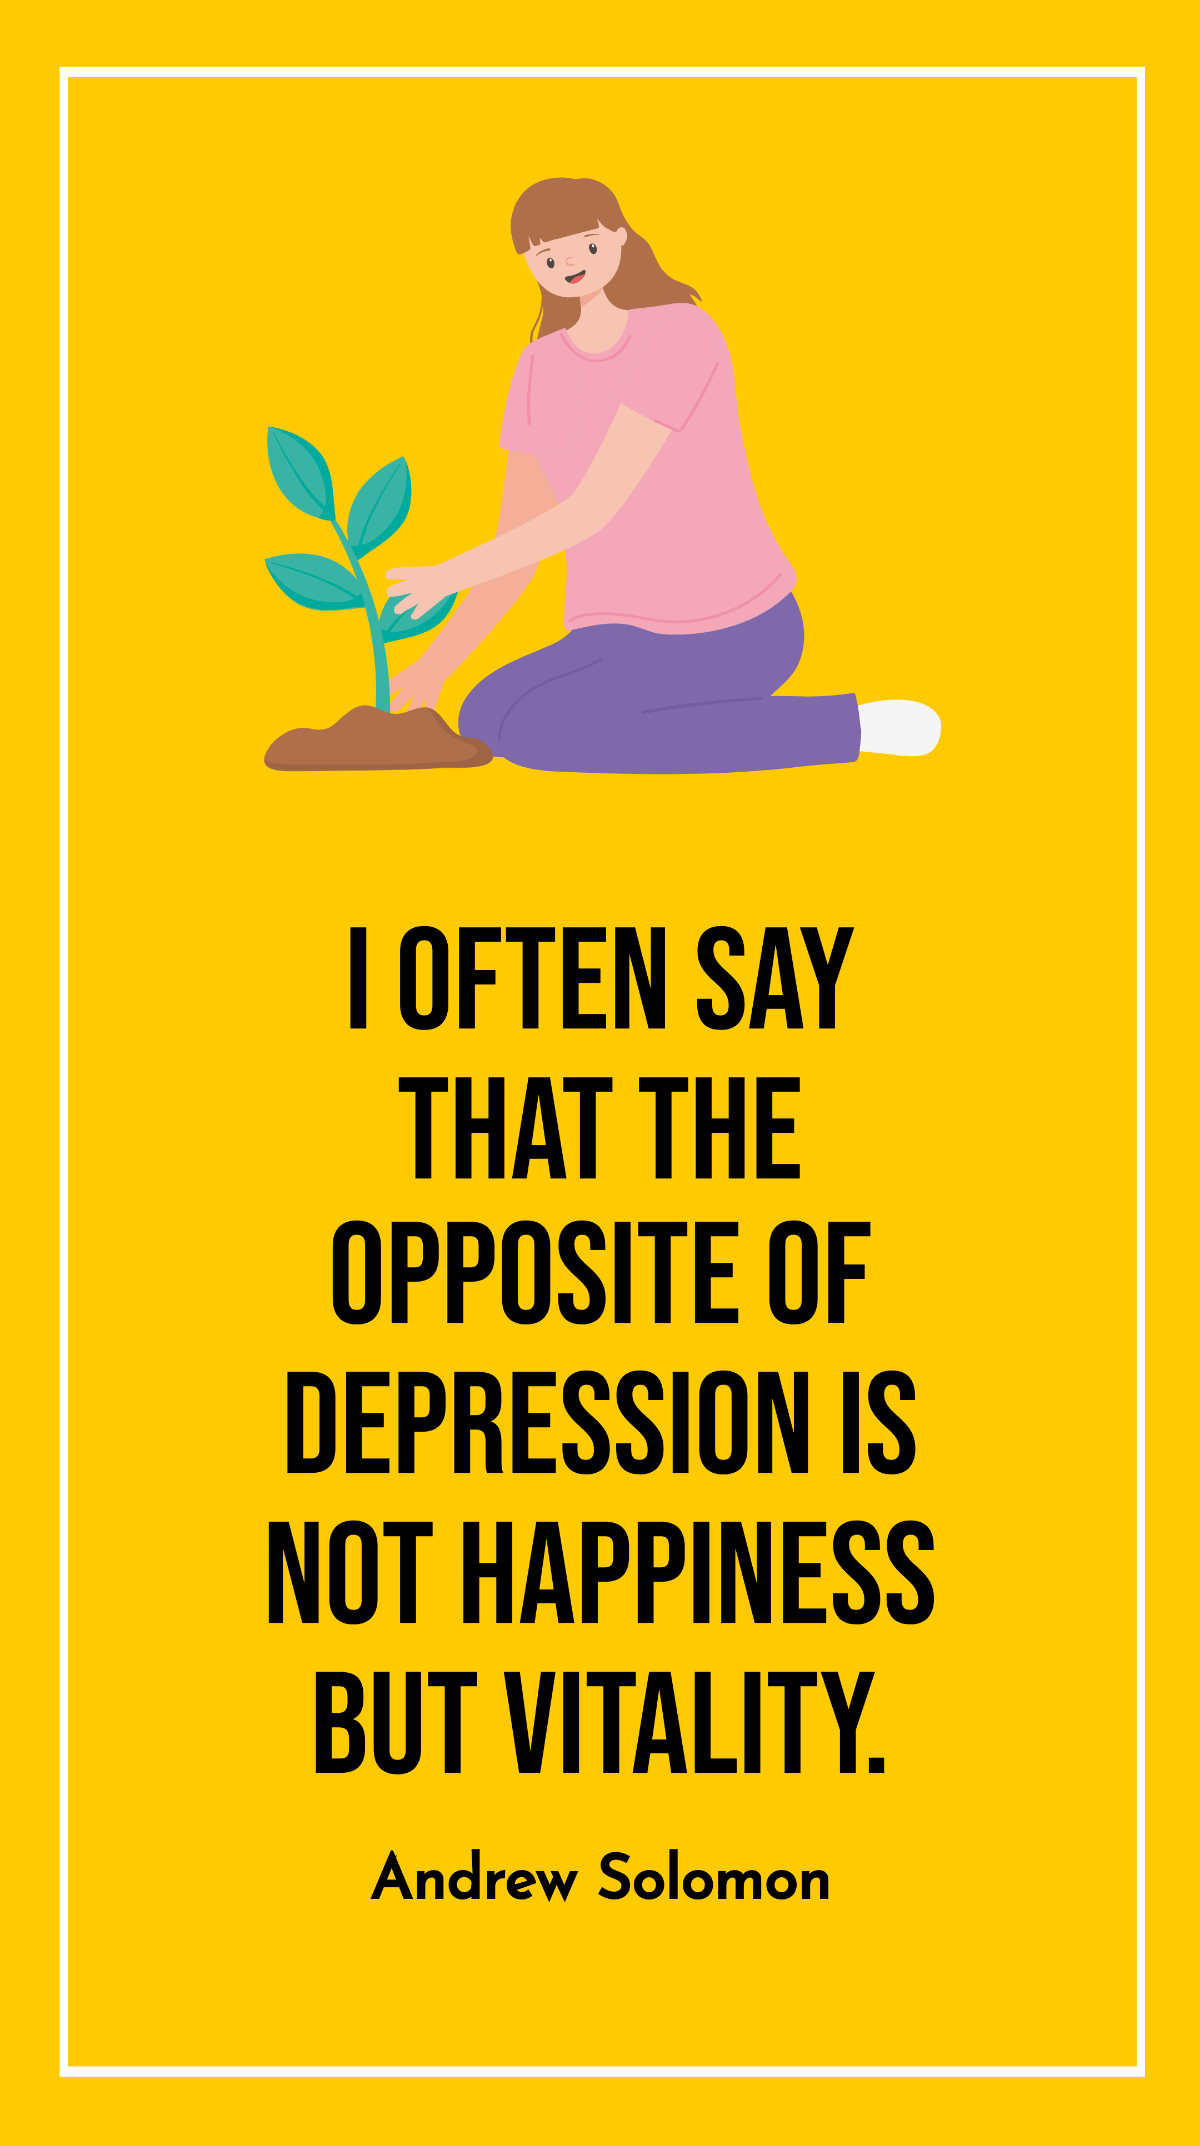 Andrew Solomon - I often say that the opposite of depression is not happiness but vitality. Template